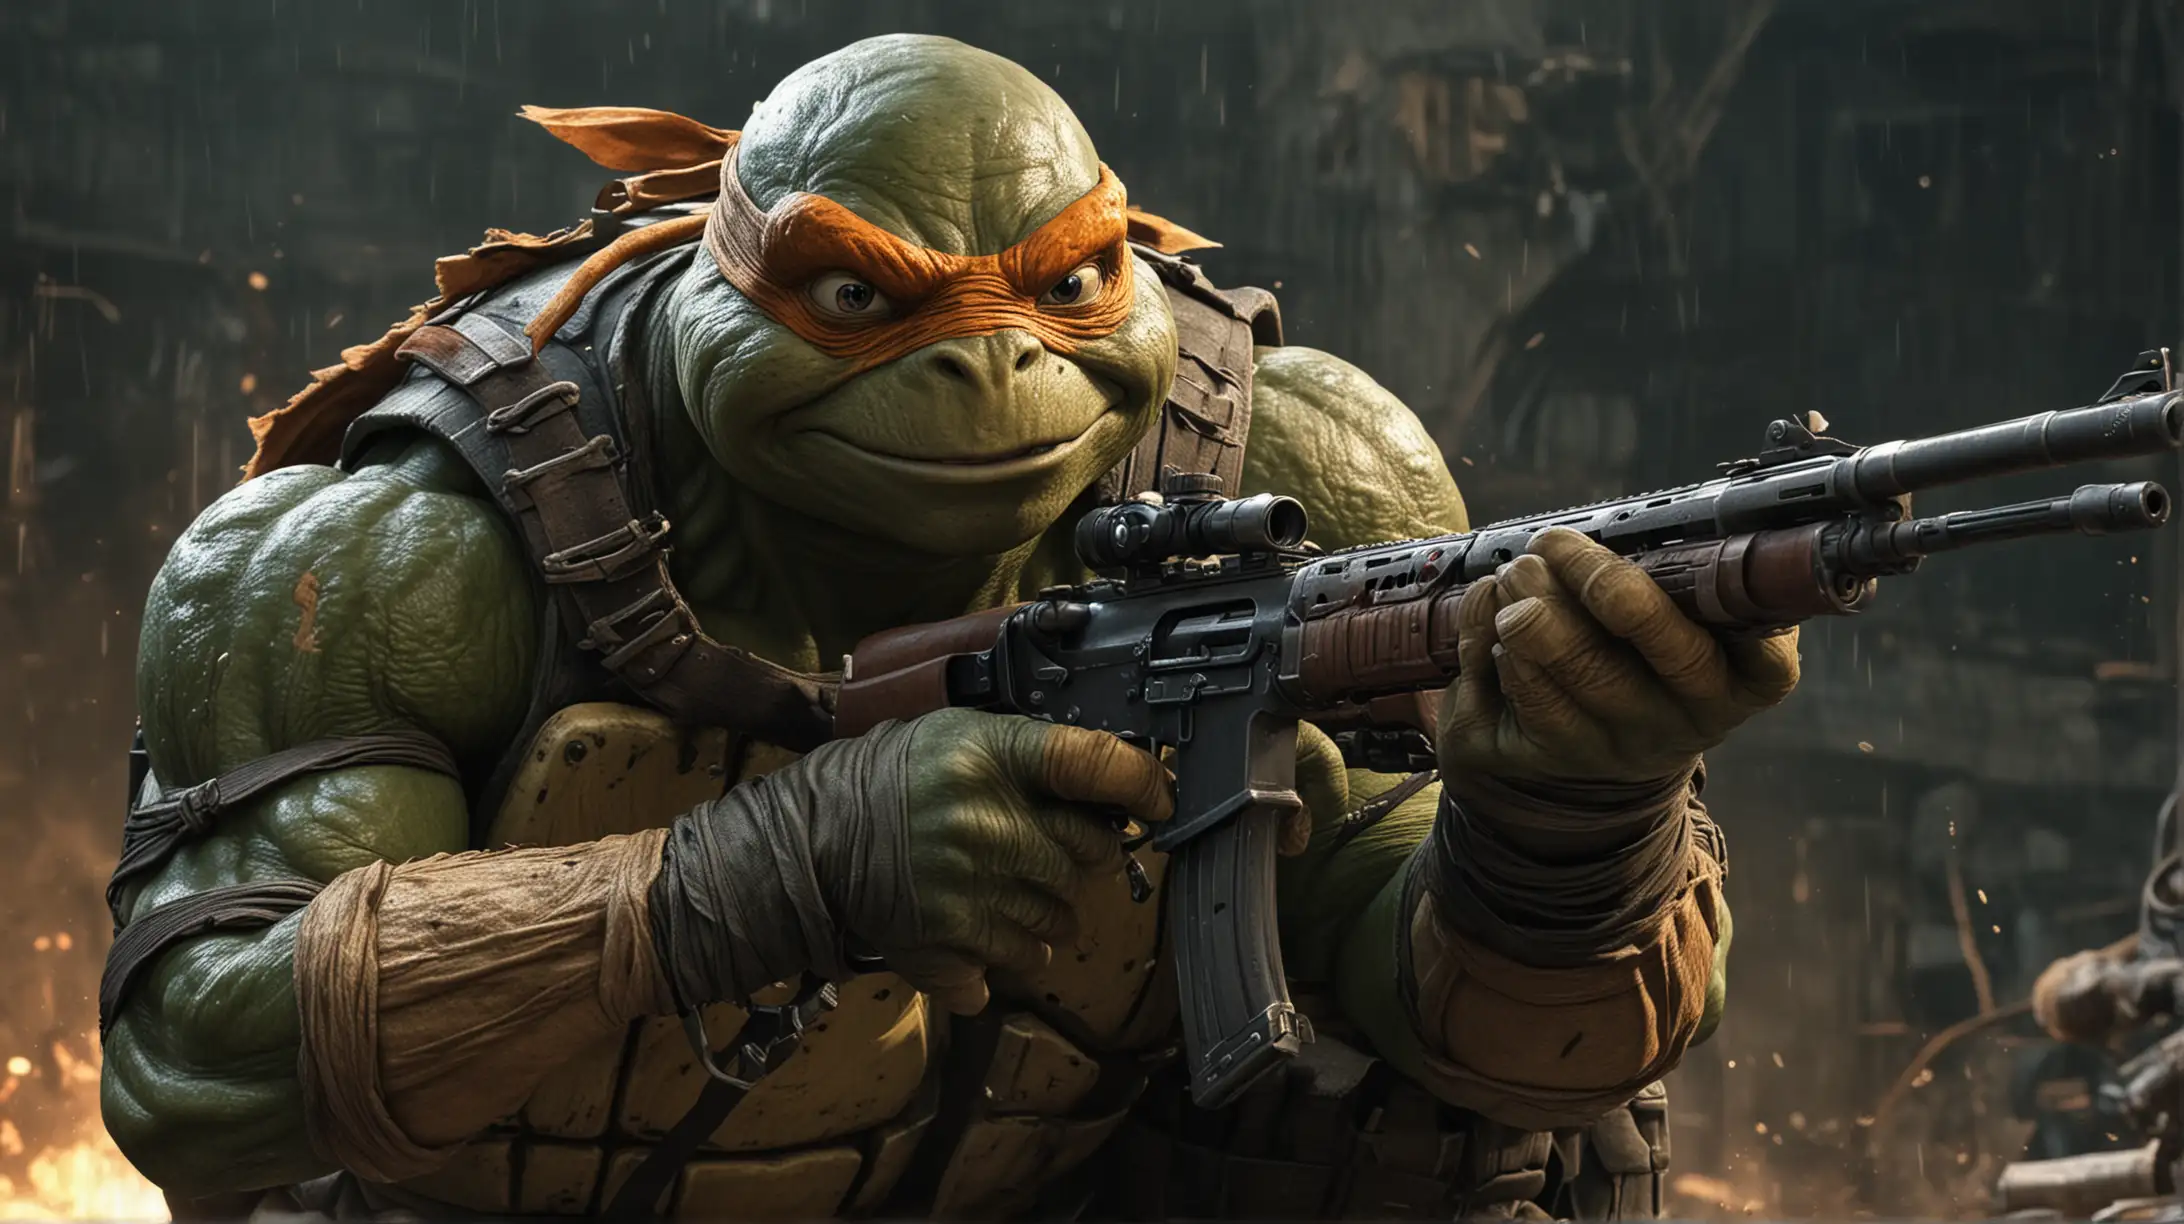 Michaelangelo  the Ninja turtle. Firing a rifle from the shoulder. dark and gritty. war scream